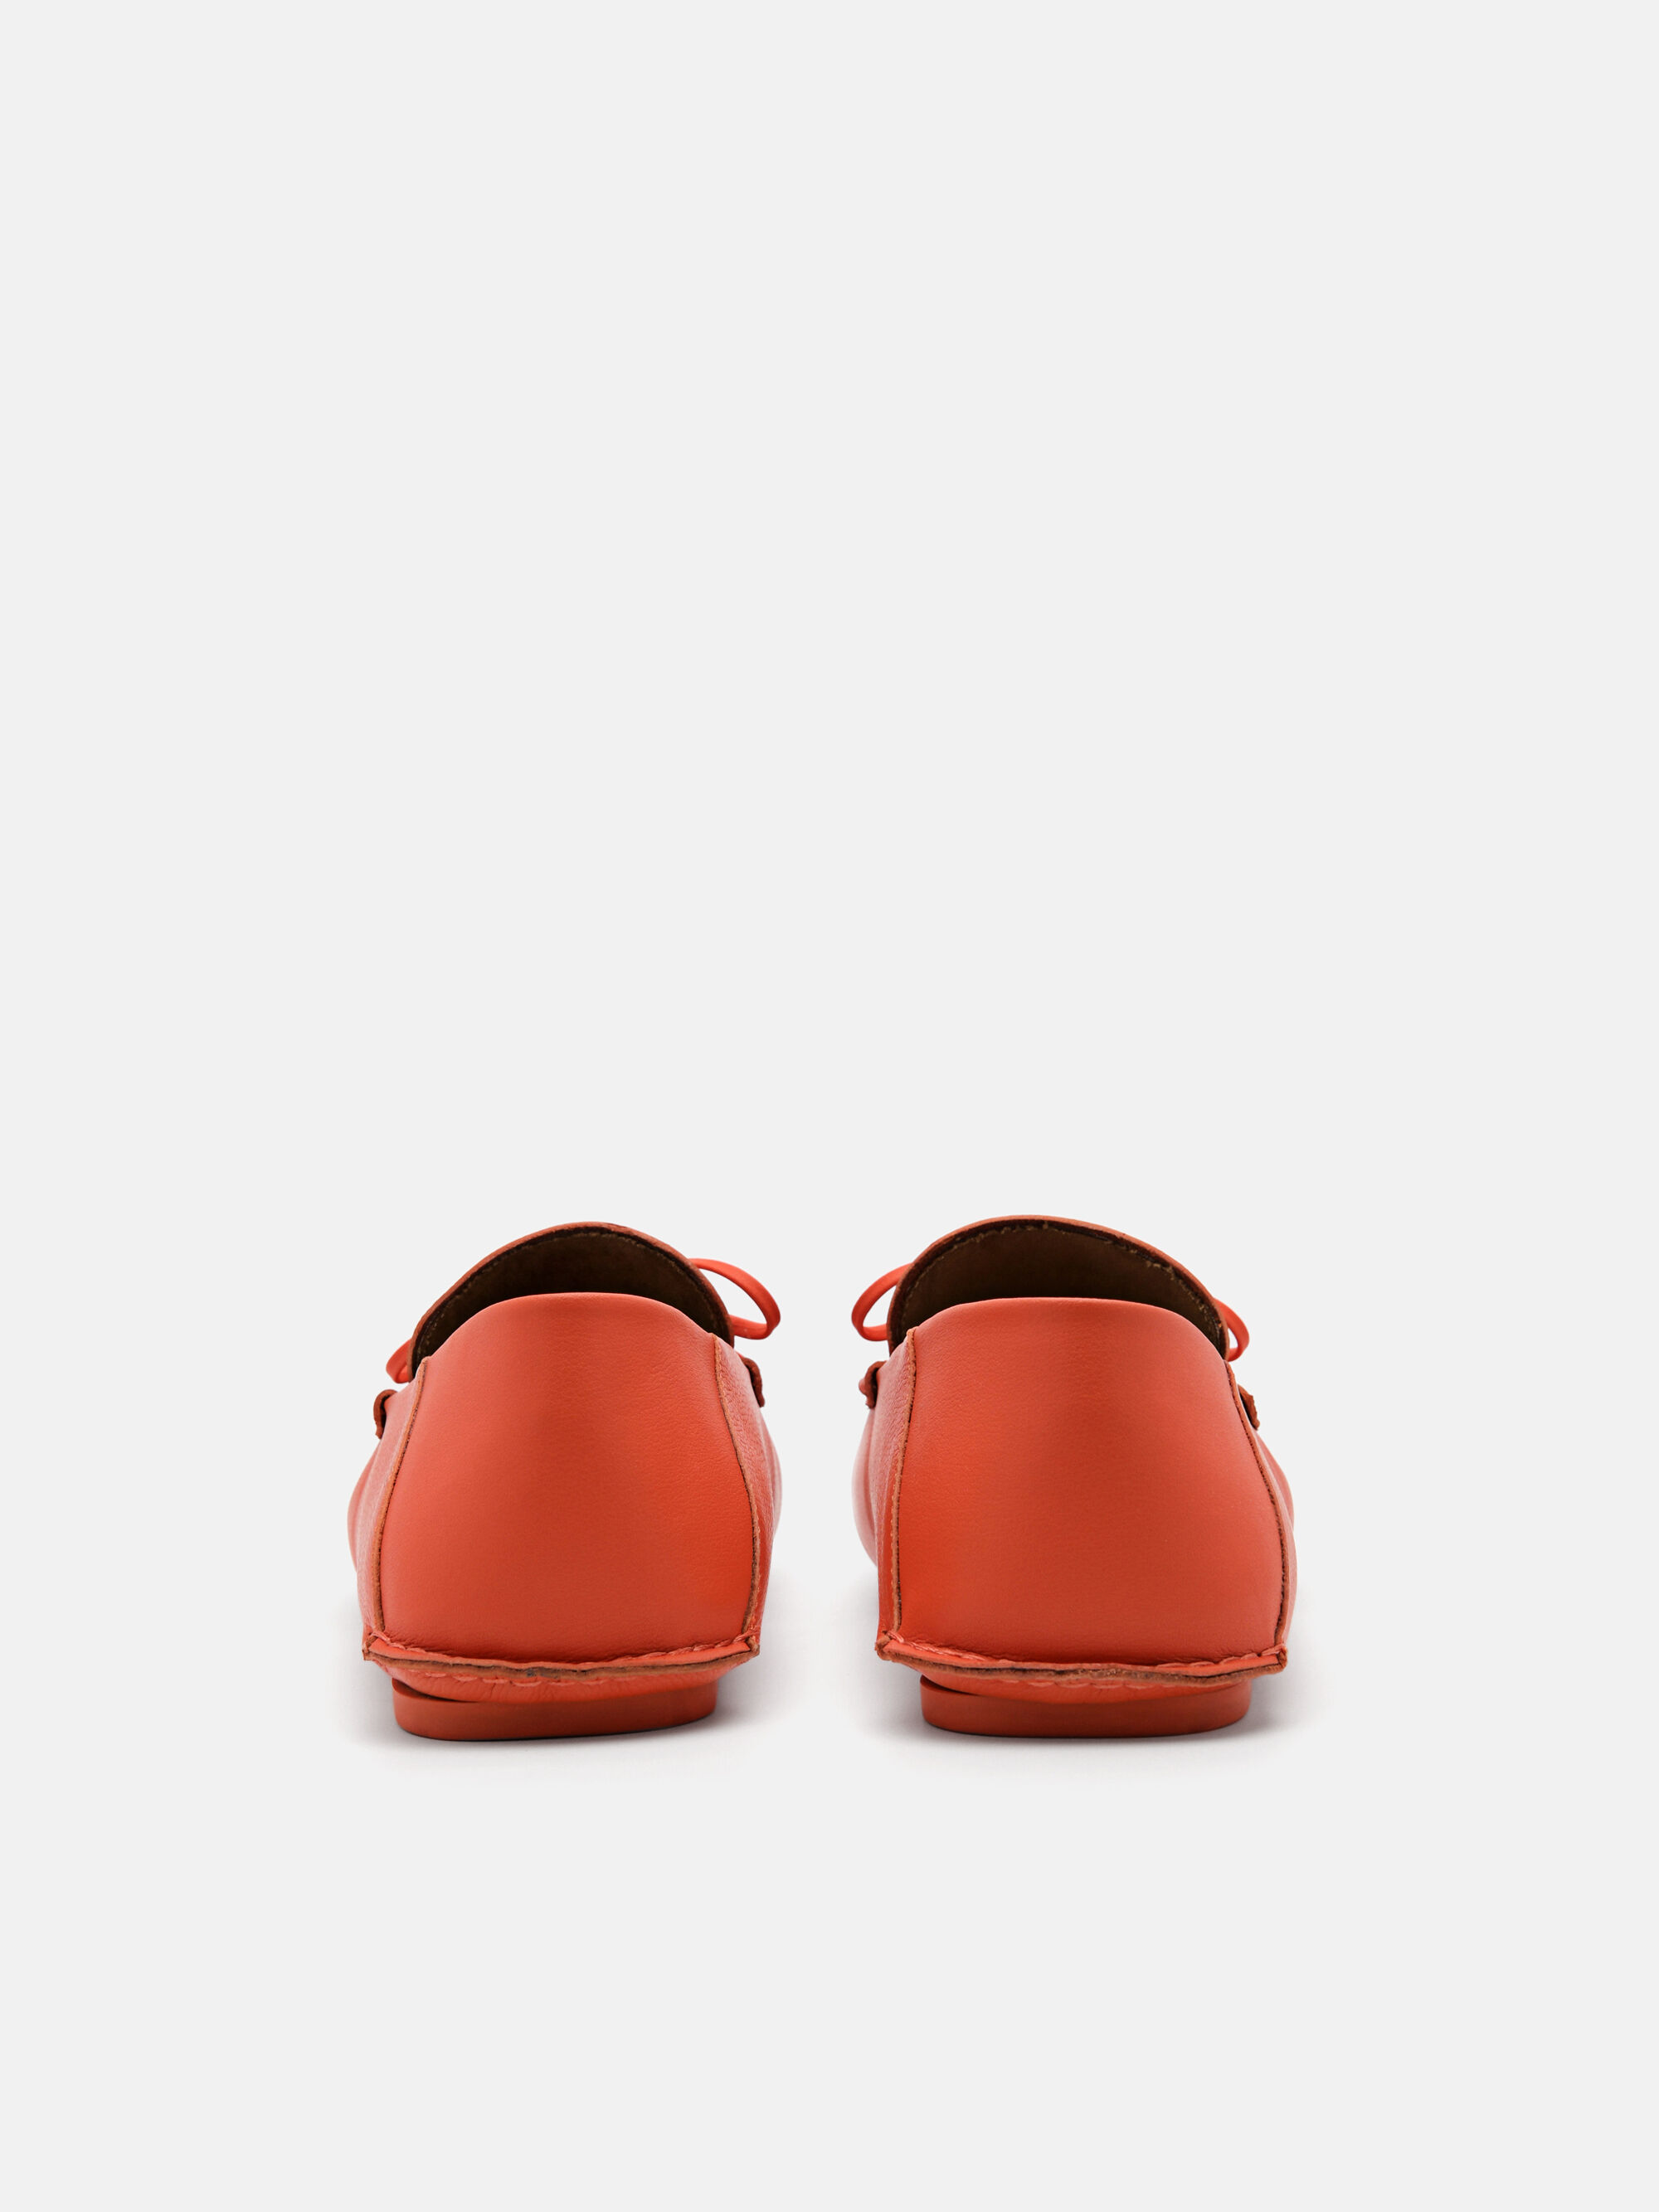 Leto Leather Driving Shoes, Orange